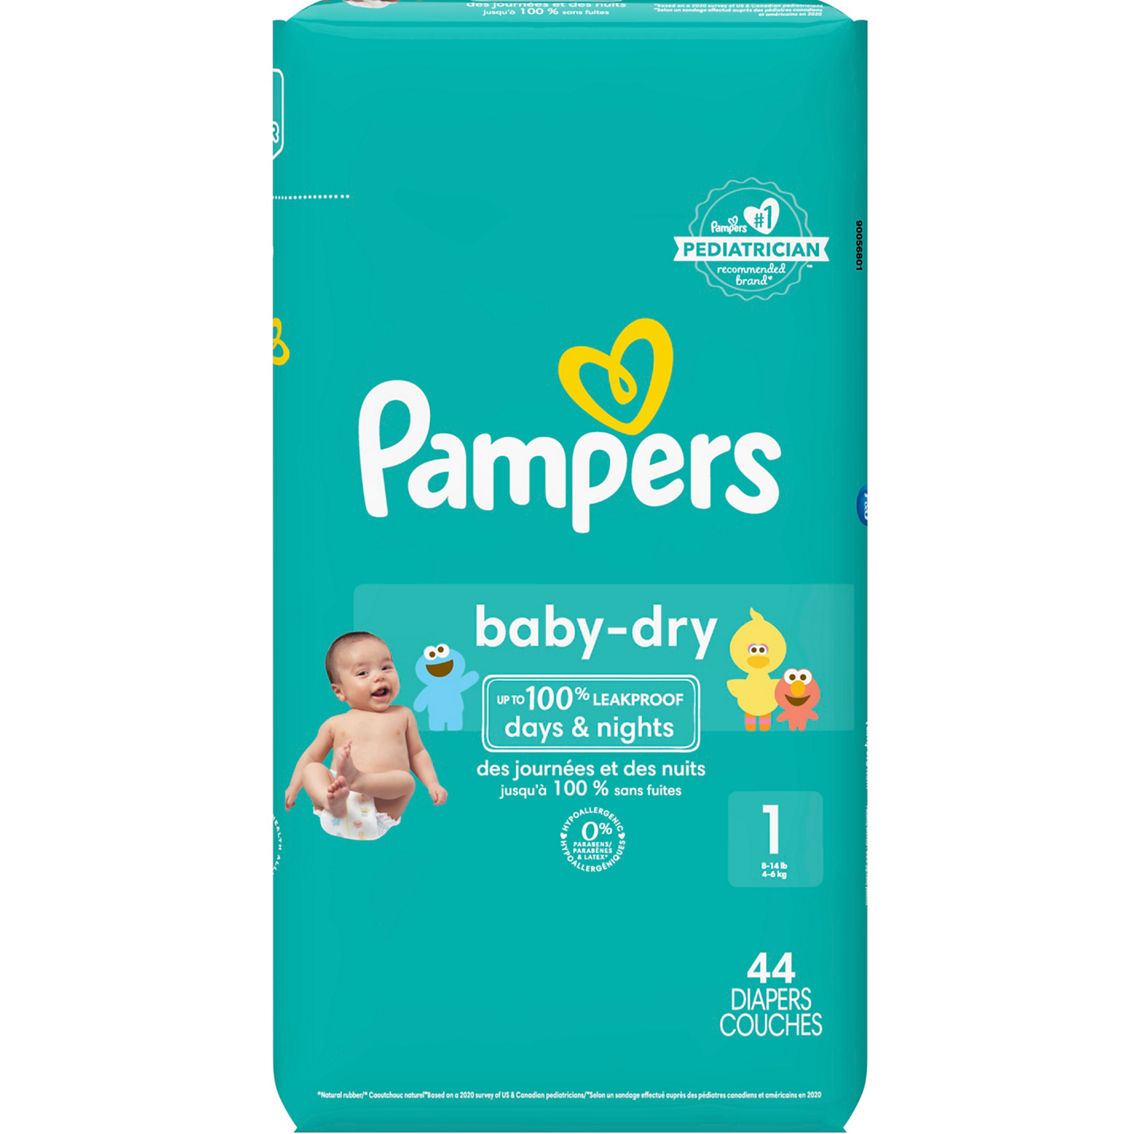 Pampers Baby Dry Diapers Size 1 (8-14 lb.) - Image 2 of 2